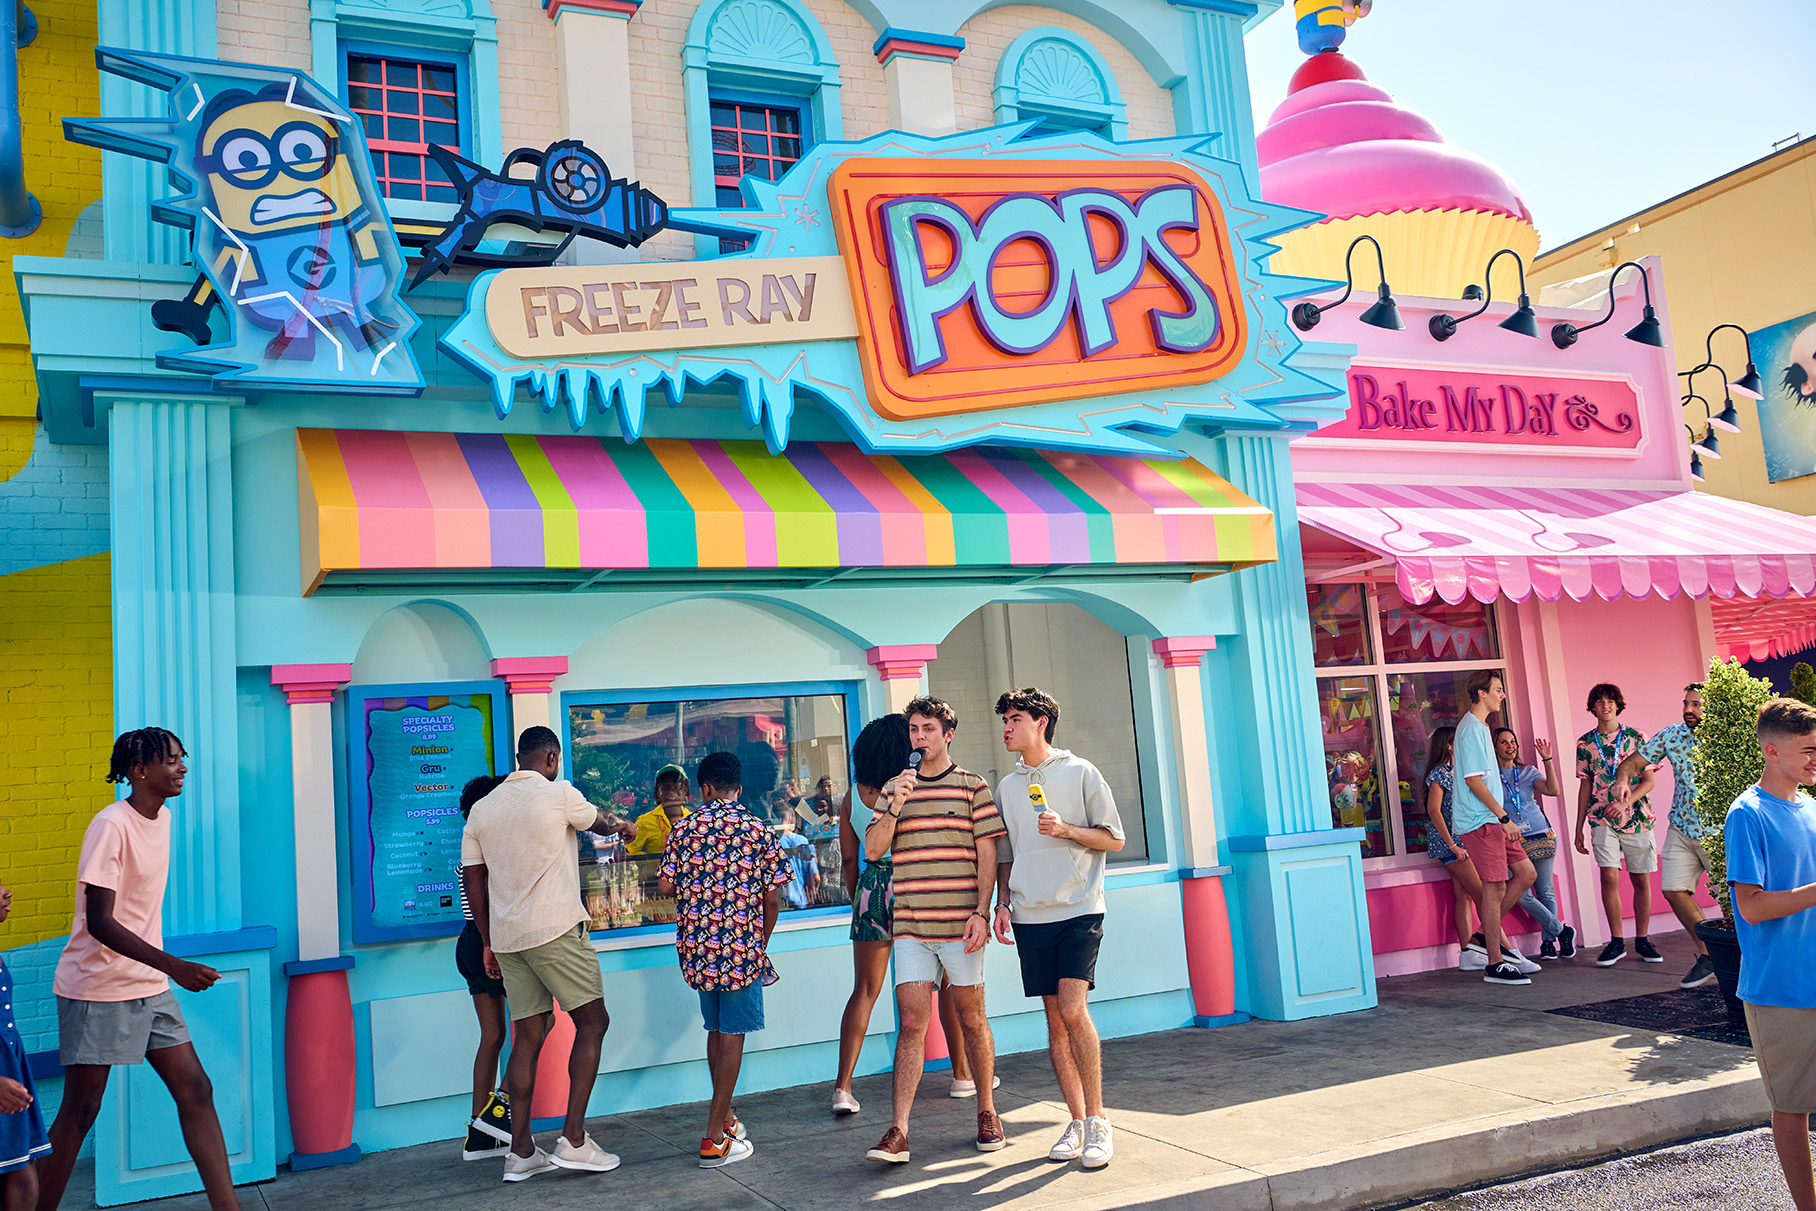 Freeze Ray Pops in Minion Land at Universal Orlando Resort